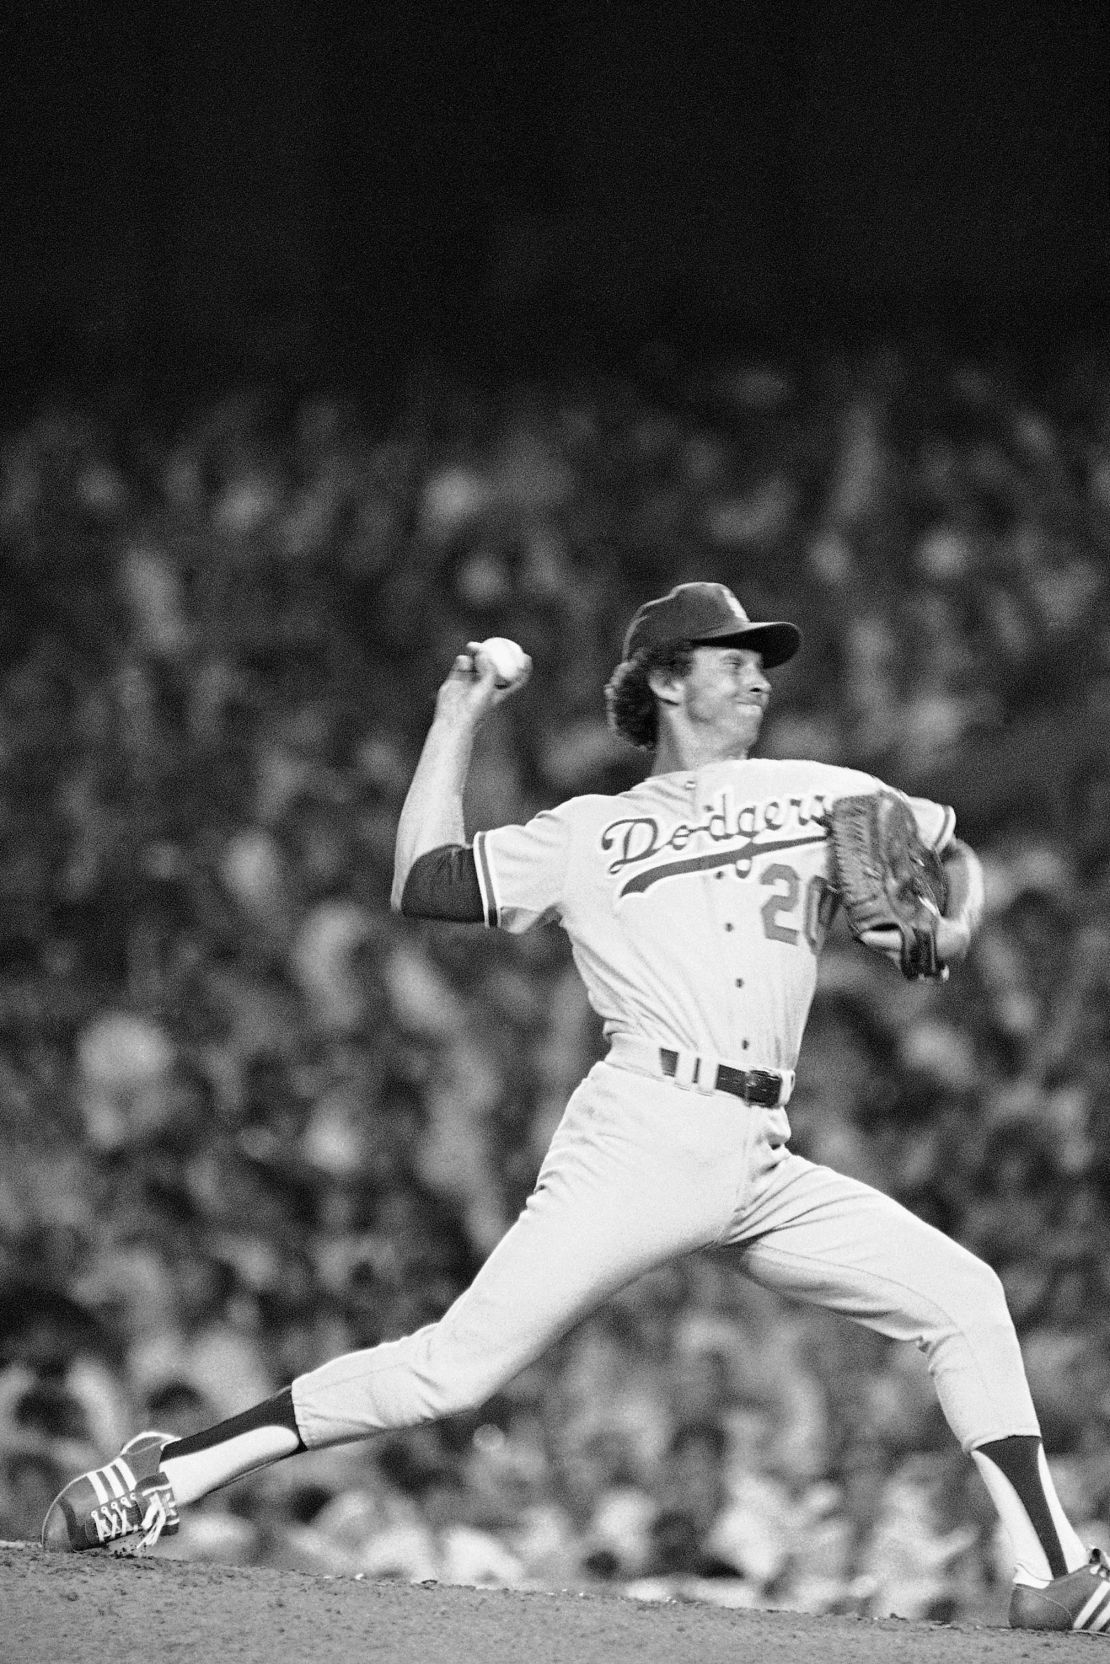 This July 20, 1977, file photo shows American League pitcher Don Sutton of the Los Angeles Dodgers in the 48th All-Star Game in New York. 